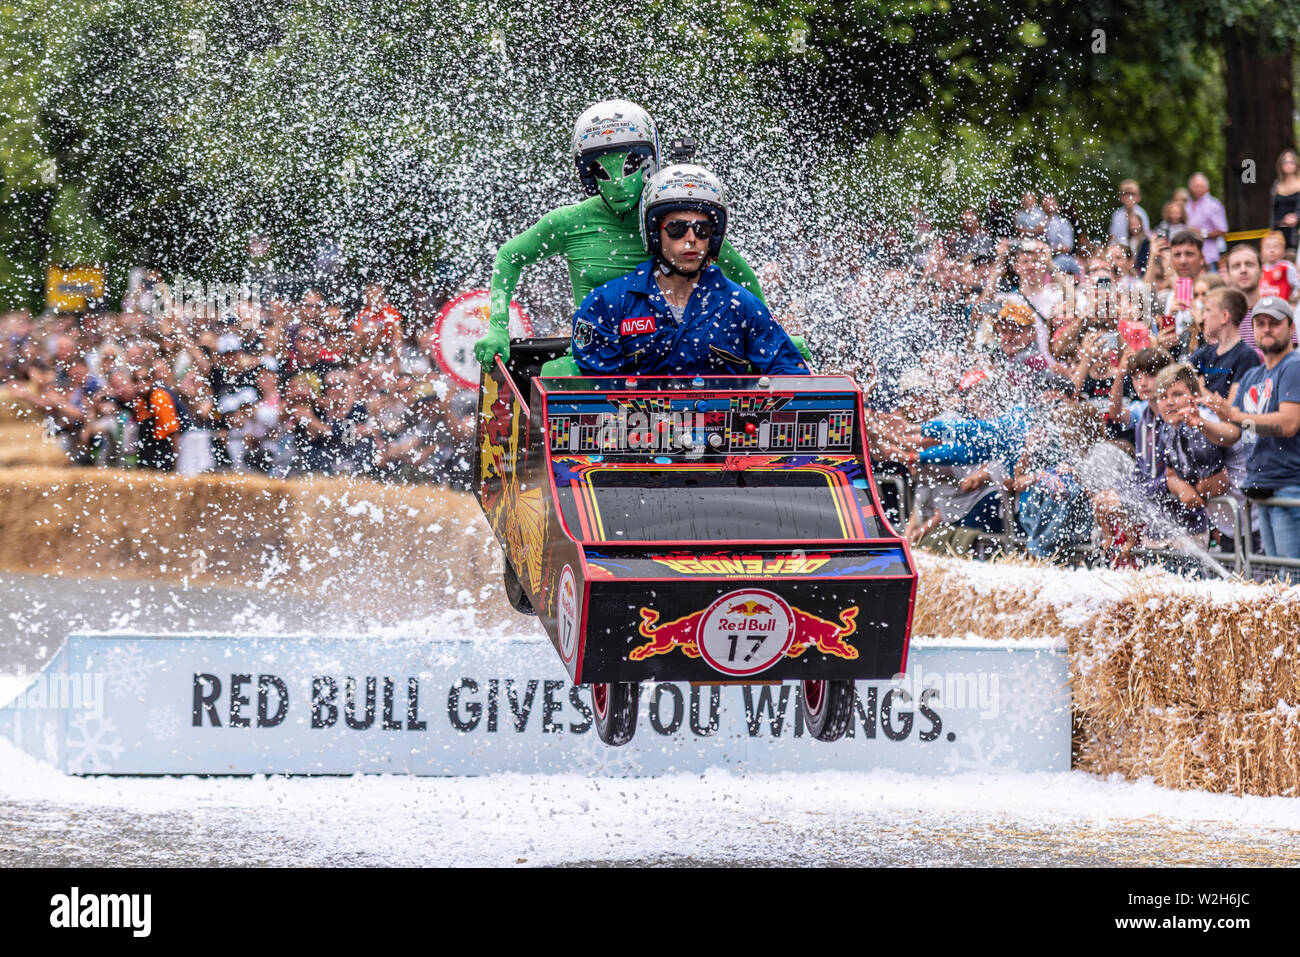 Team Defender in the Red Bull Soapbox Race at Alexandra Park, London, UK. Space game jumping ramp with people Stock Photo - Alamy